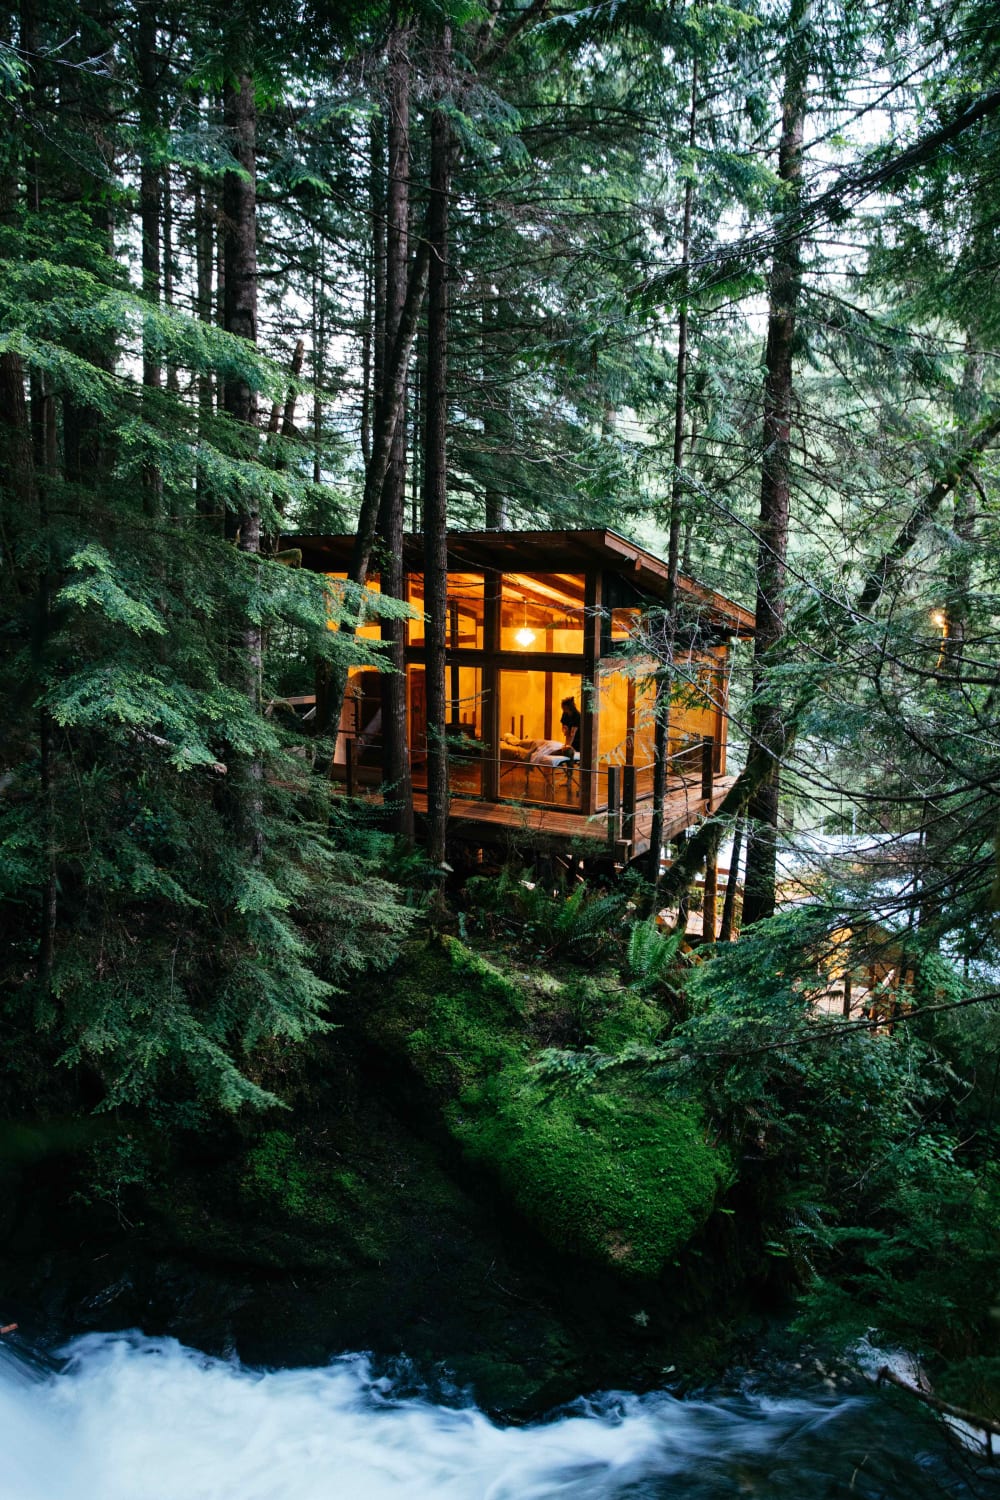 Cabin in the dense coniferous forests on the Pacific coast of British Columbia, Canada.